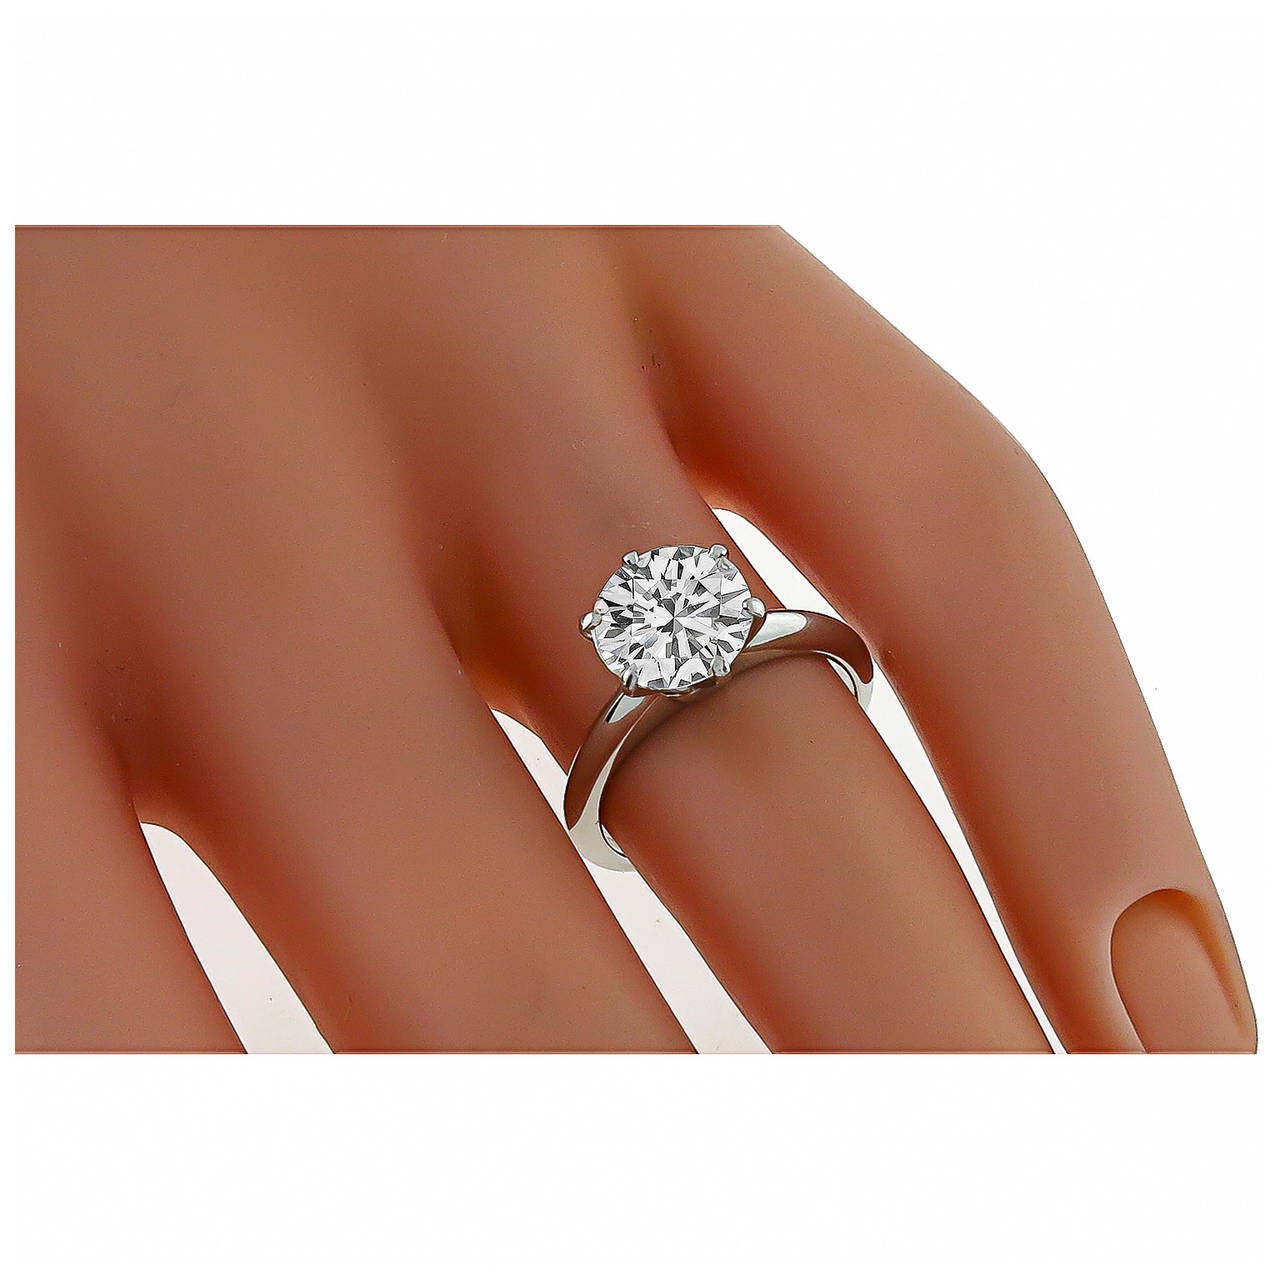 Glittering at the center of this Tiffany & Co platinum engagement ring is 2.14ct round brilliant cut diamond. The color of the diamond is I and the clarity is VVS2. The measurement of the top of the ring is 9mm in diameter. The ring is signed